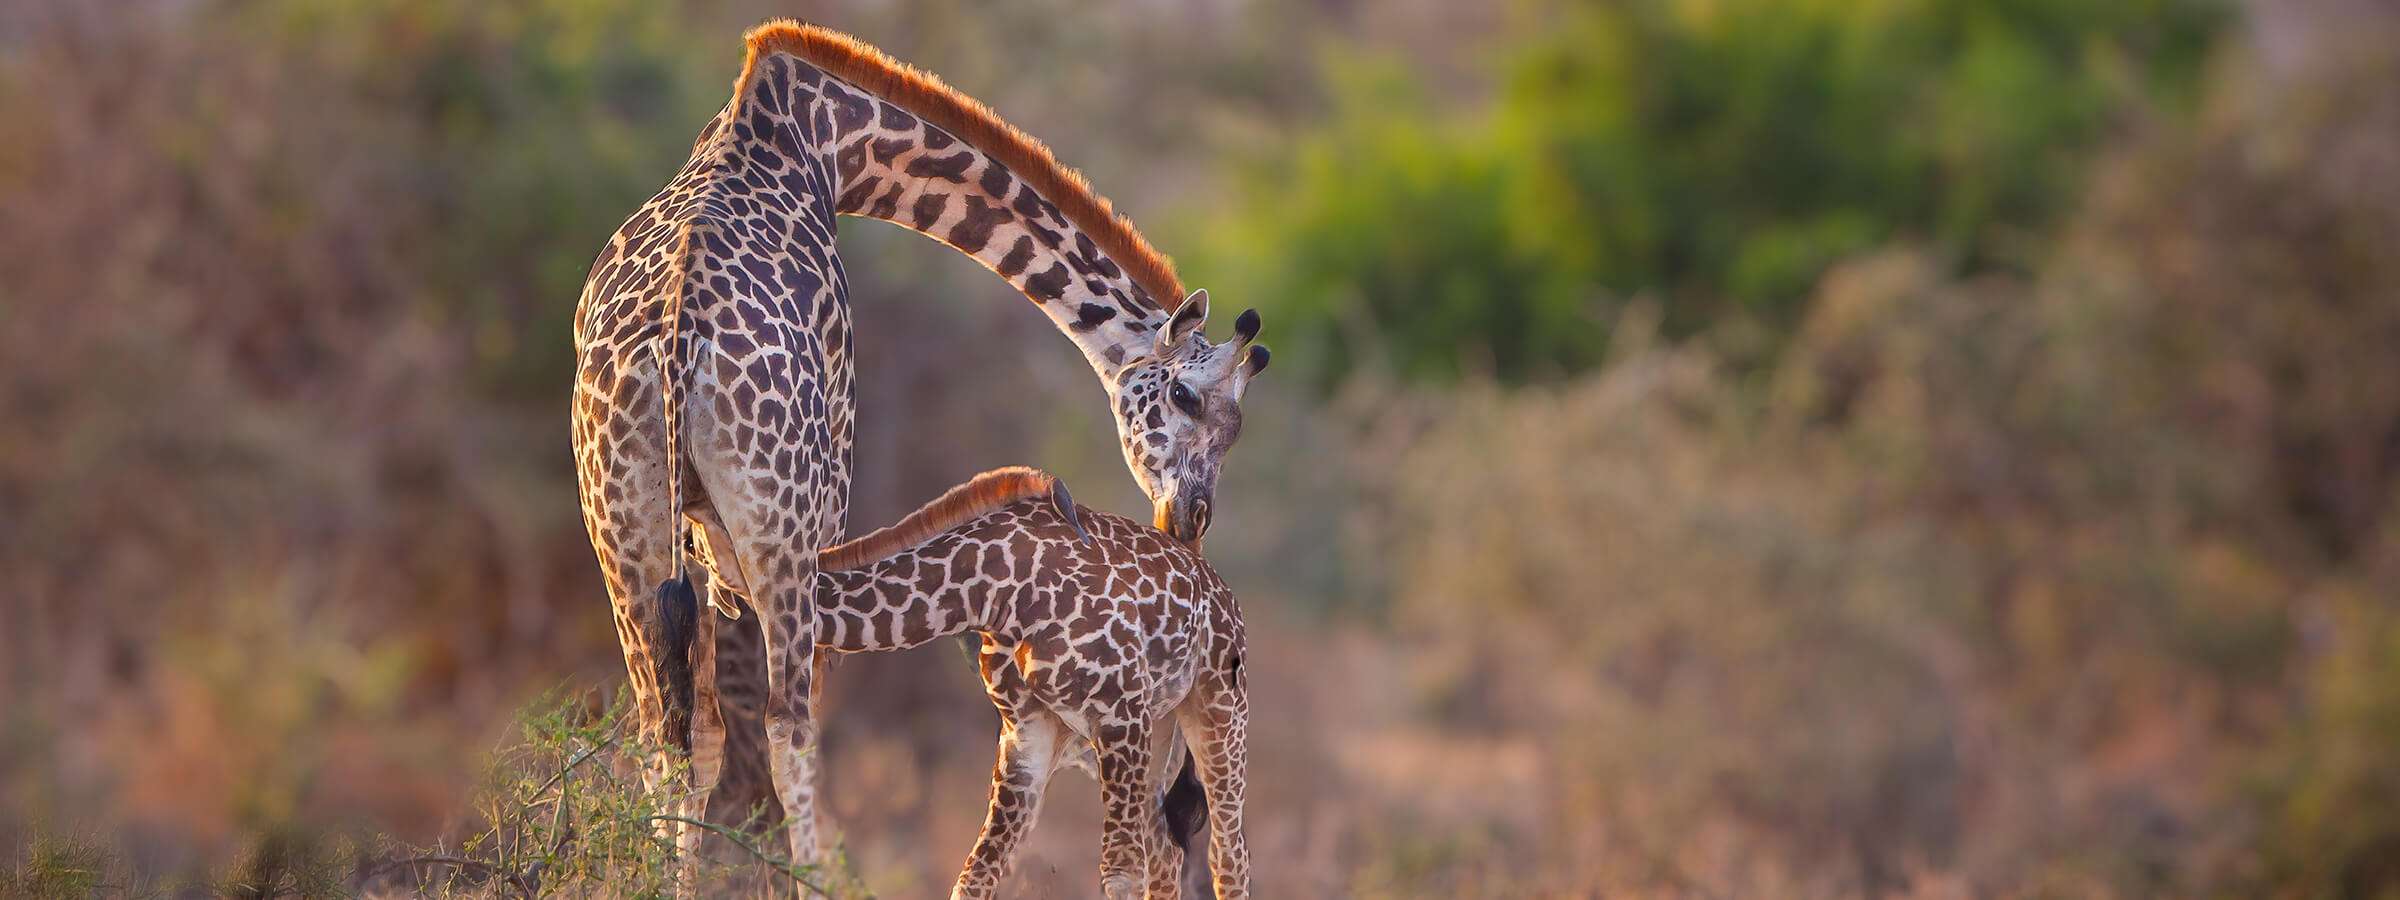 Tanzania - five thing post 1 - 5 things you never knew about giraffes